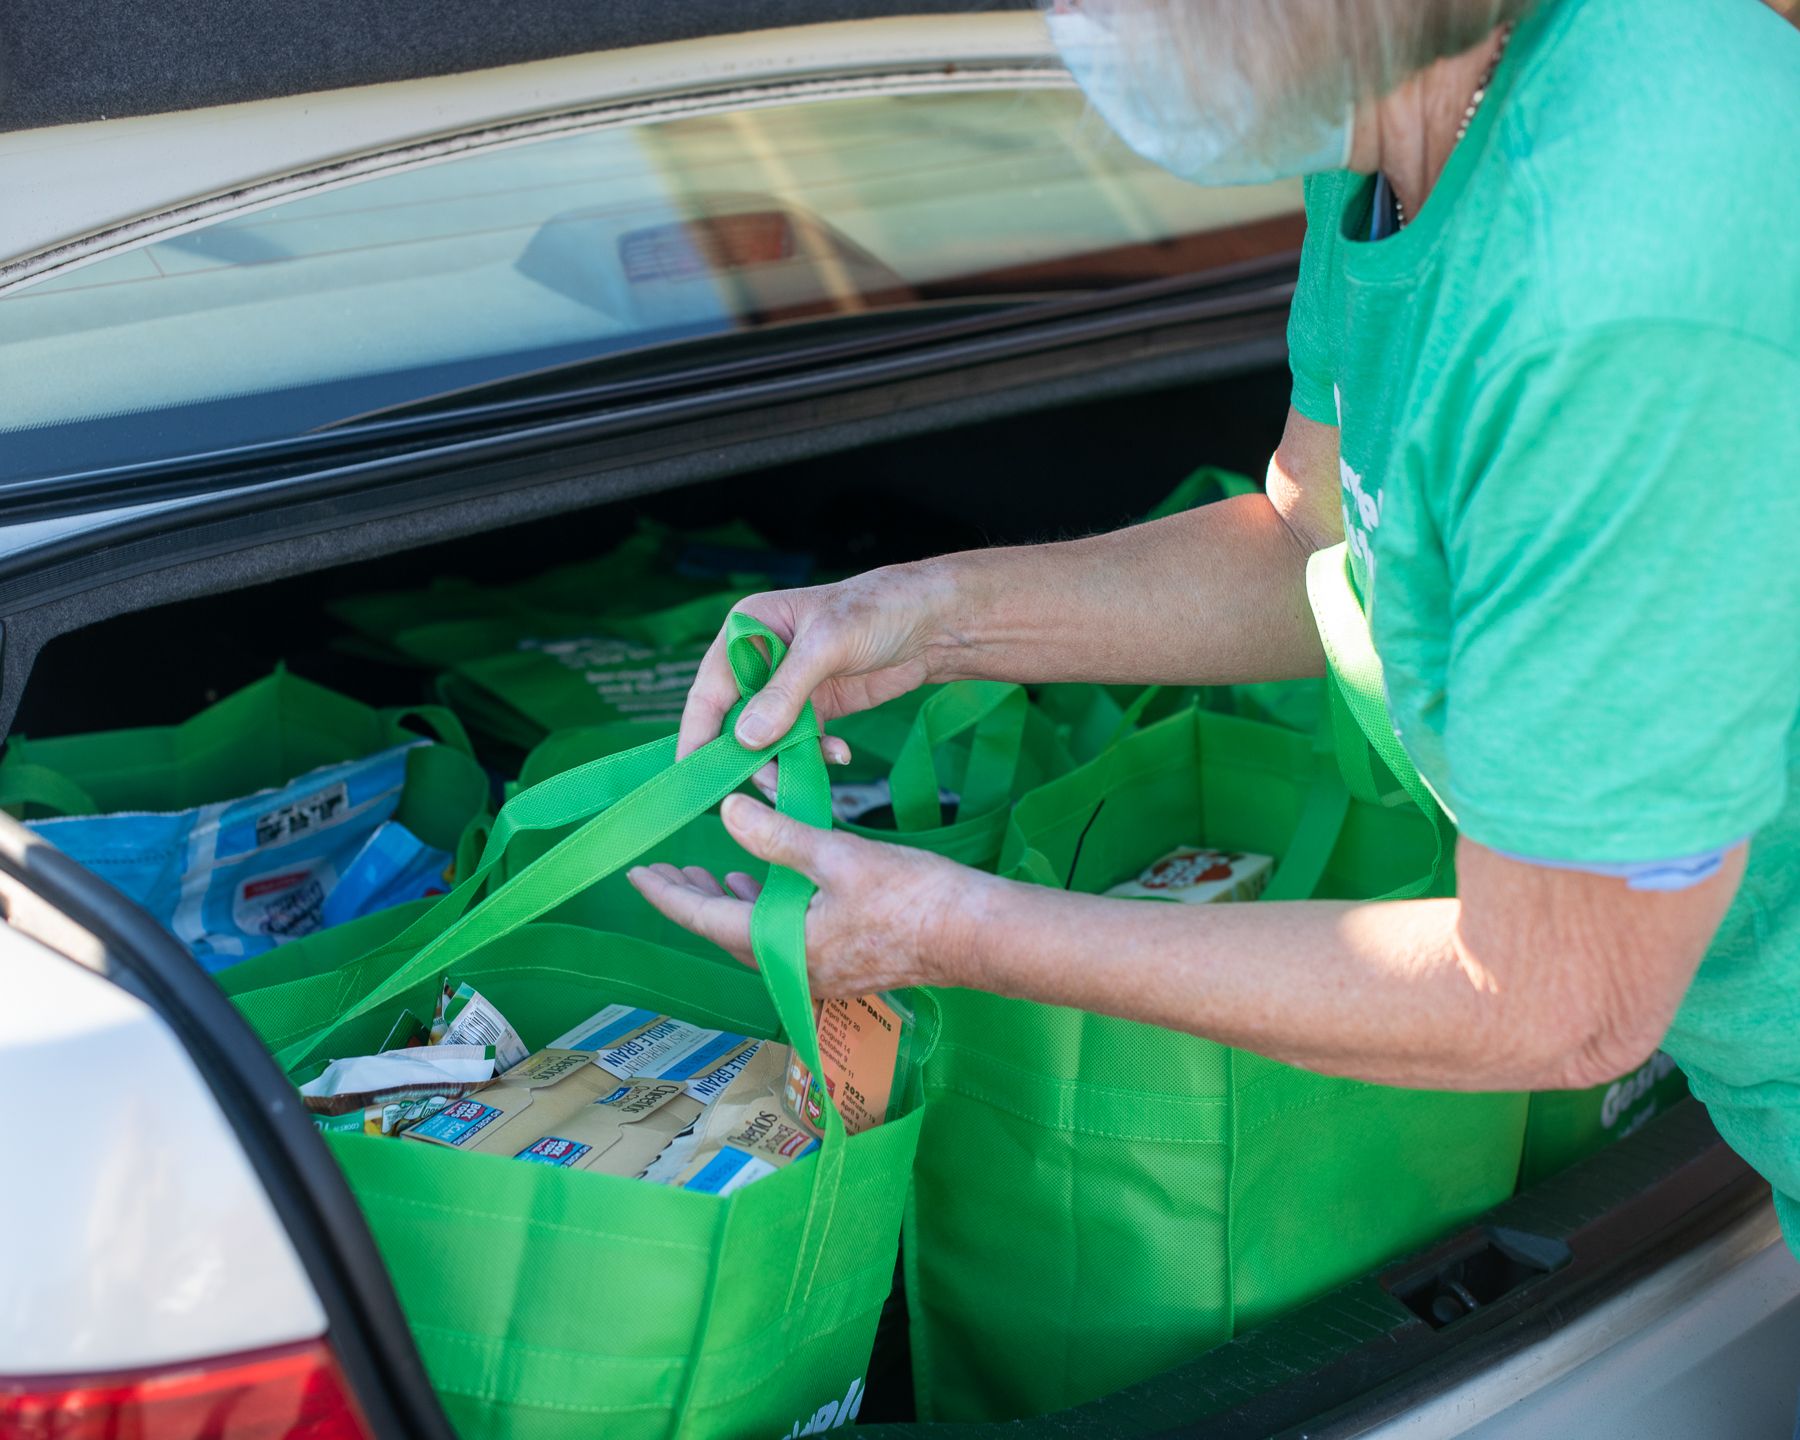 A woman loads grocery bags for A Simple Gesture High Point into her car trunk.